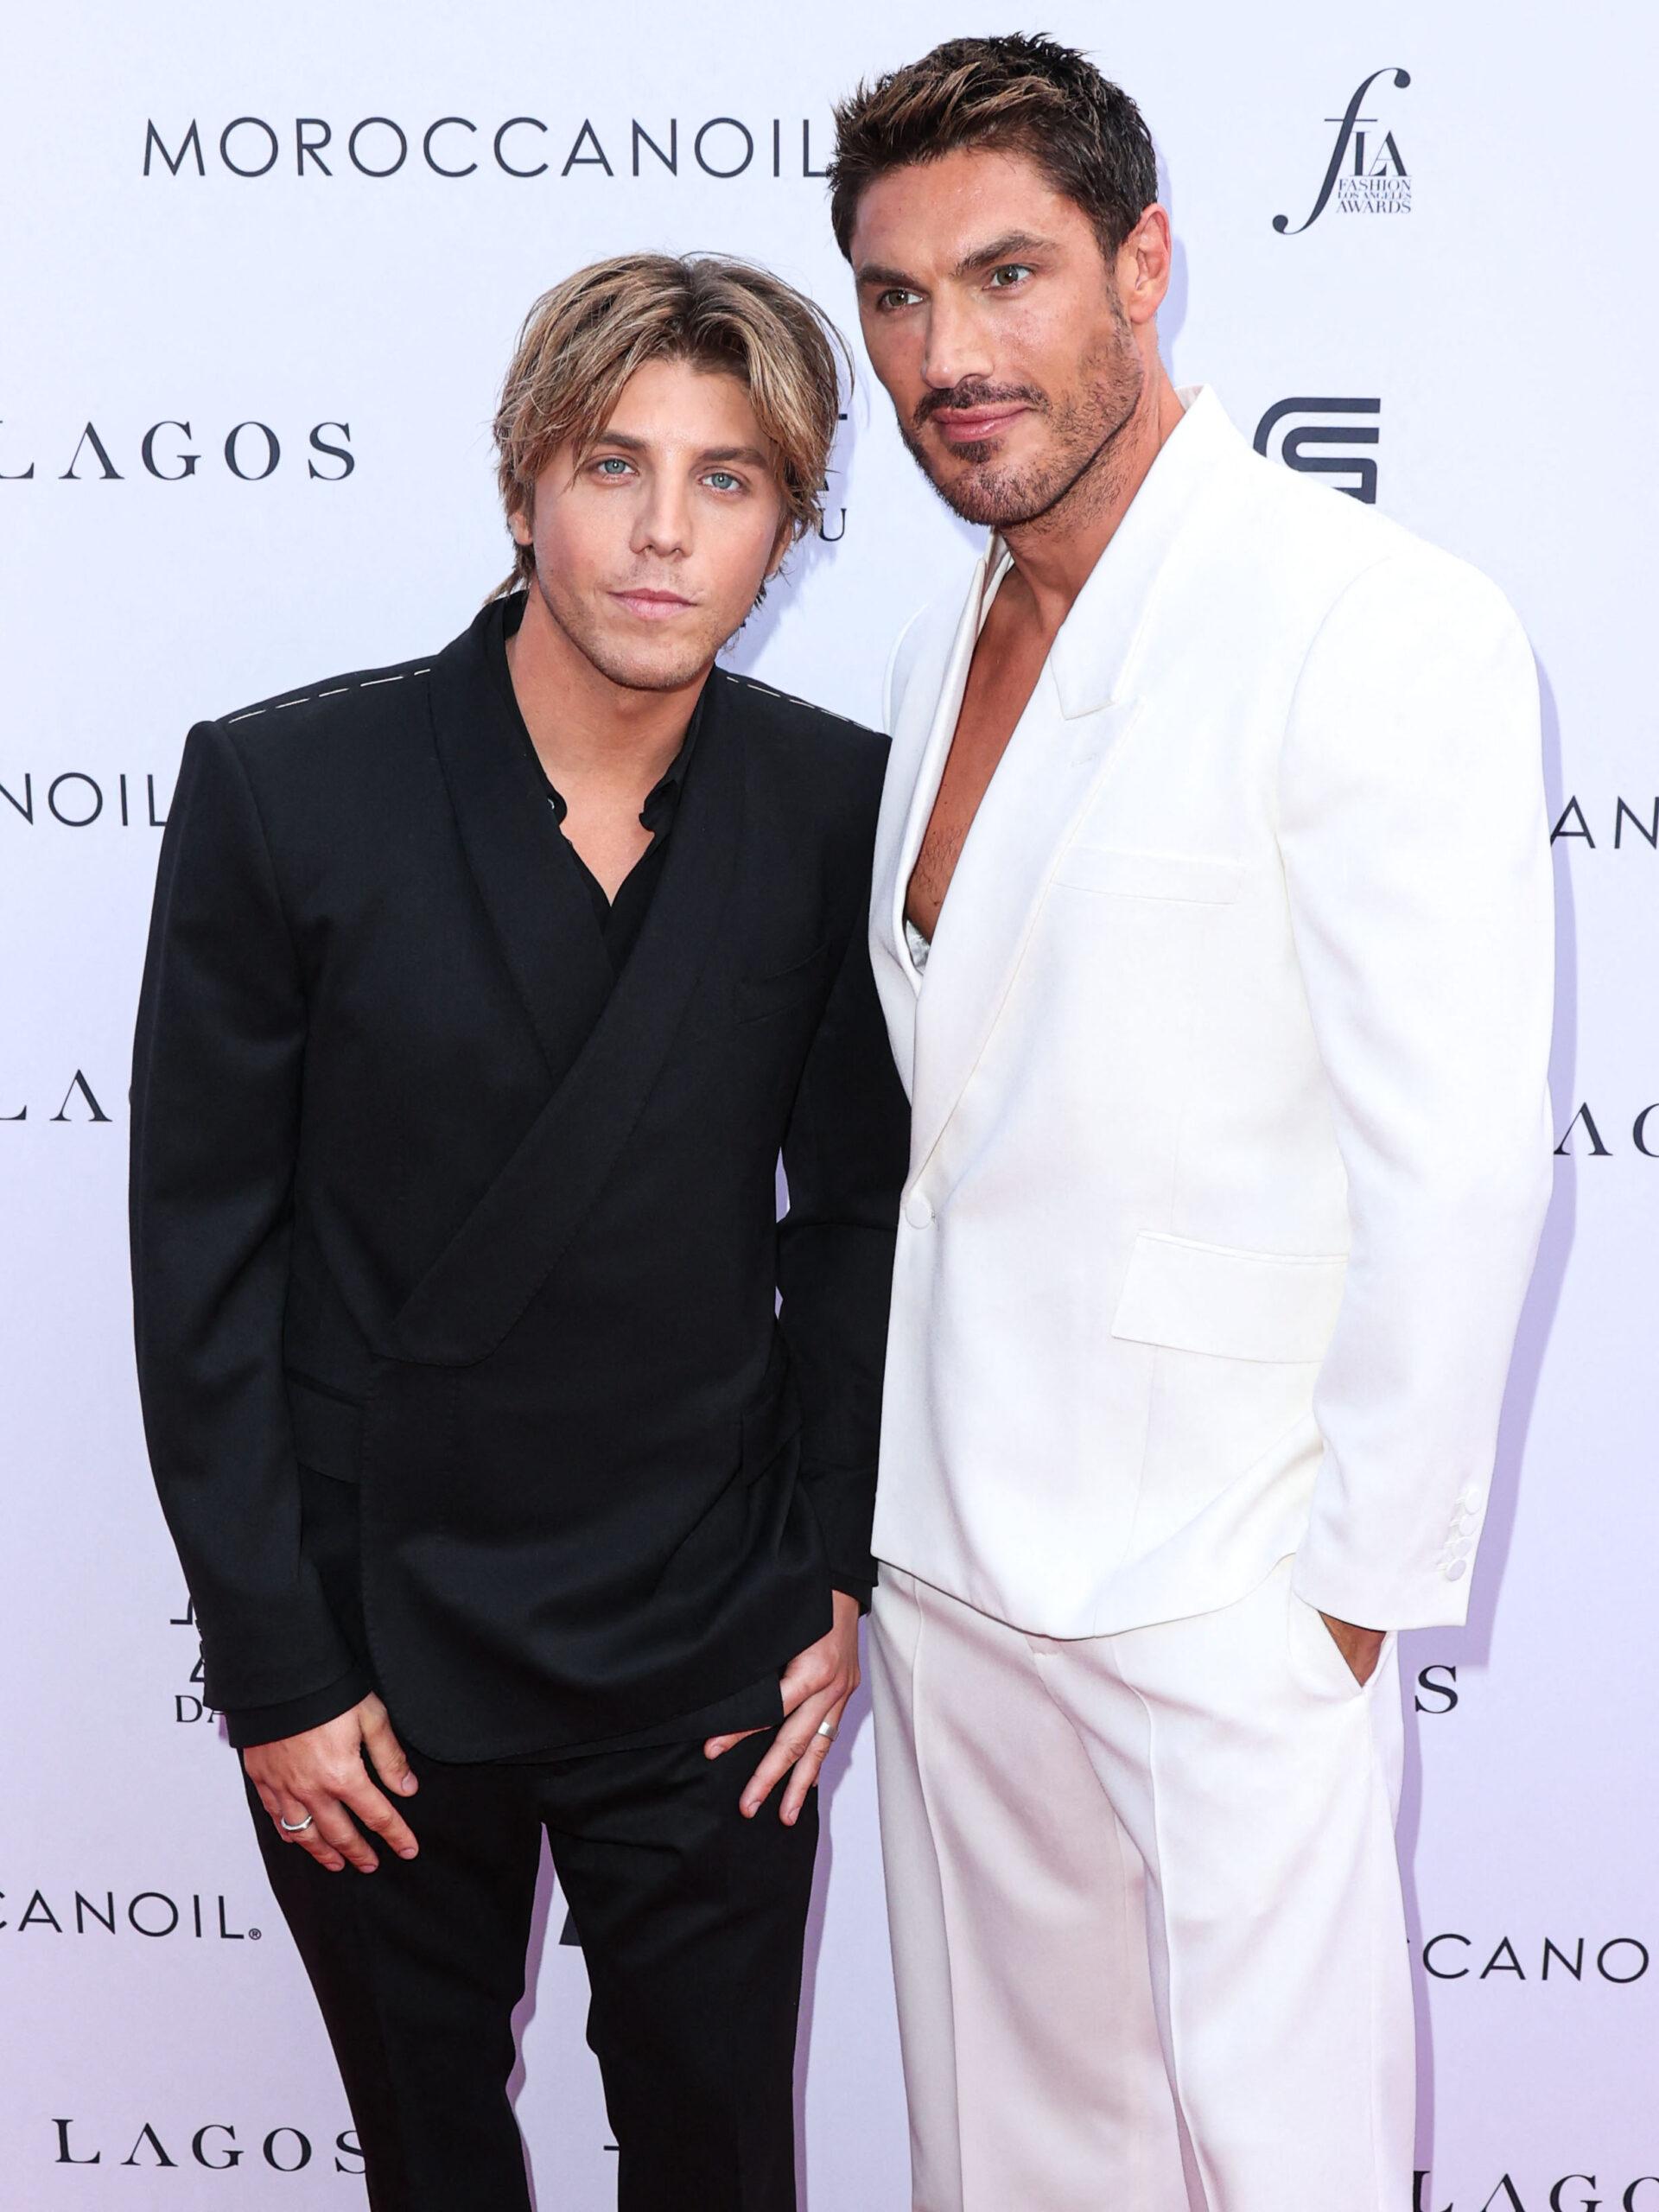 Chris Appleton & Lukas Gage attend The Daily Front Row's 7th Annual Fashion Los Angeles Awards